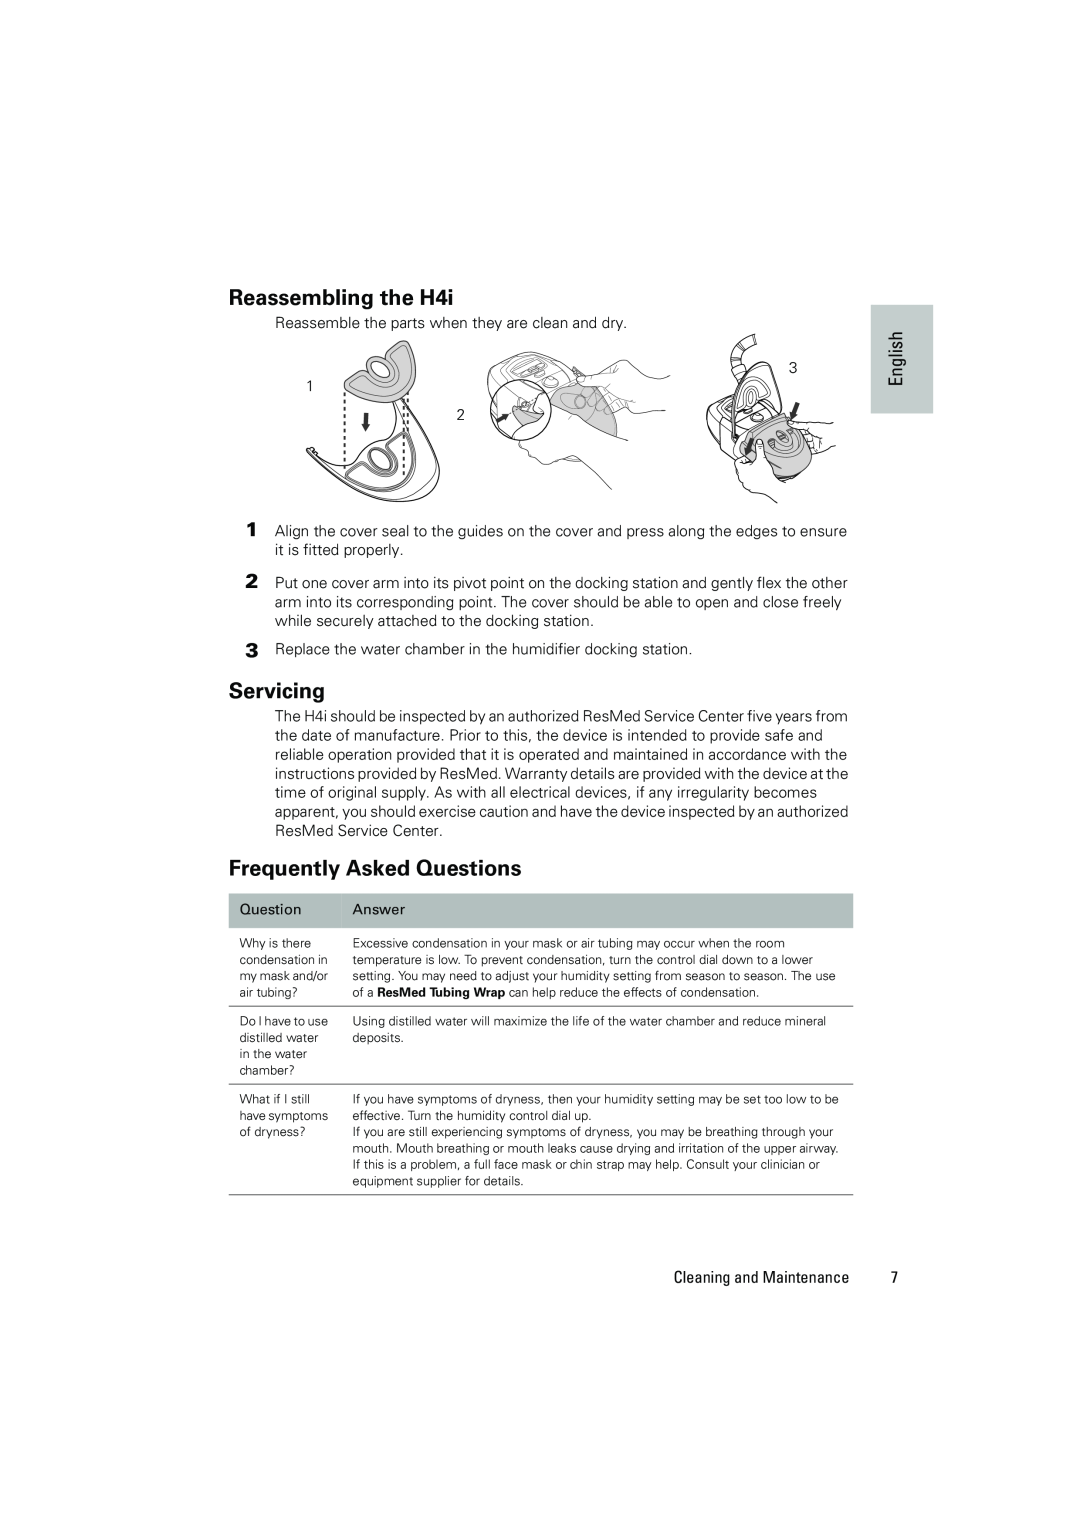 ResMed manual Reassembling the H4i, Servicing, Frequently Asked Questions, English 